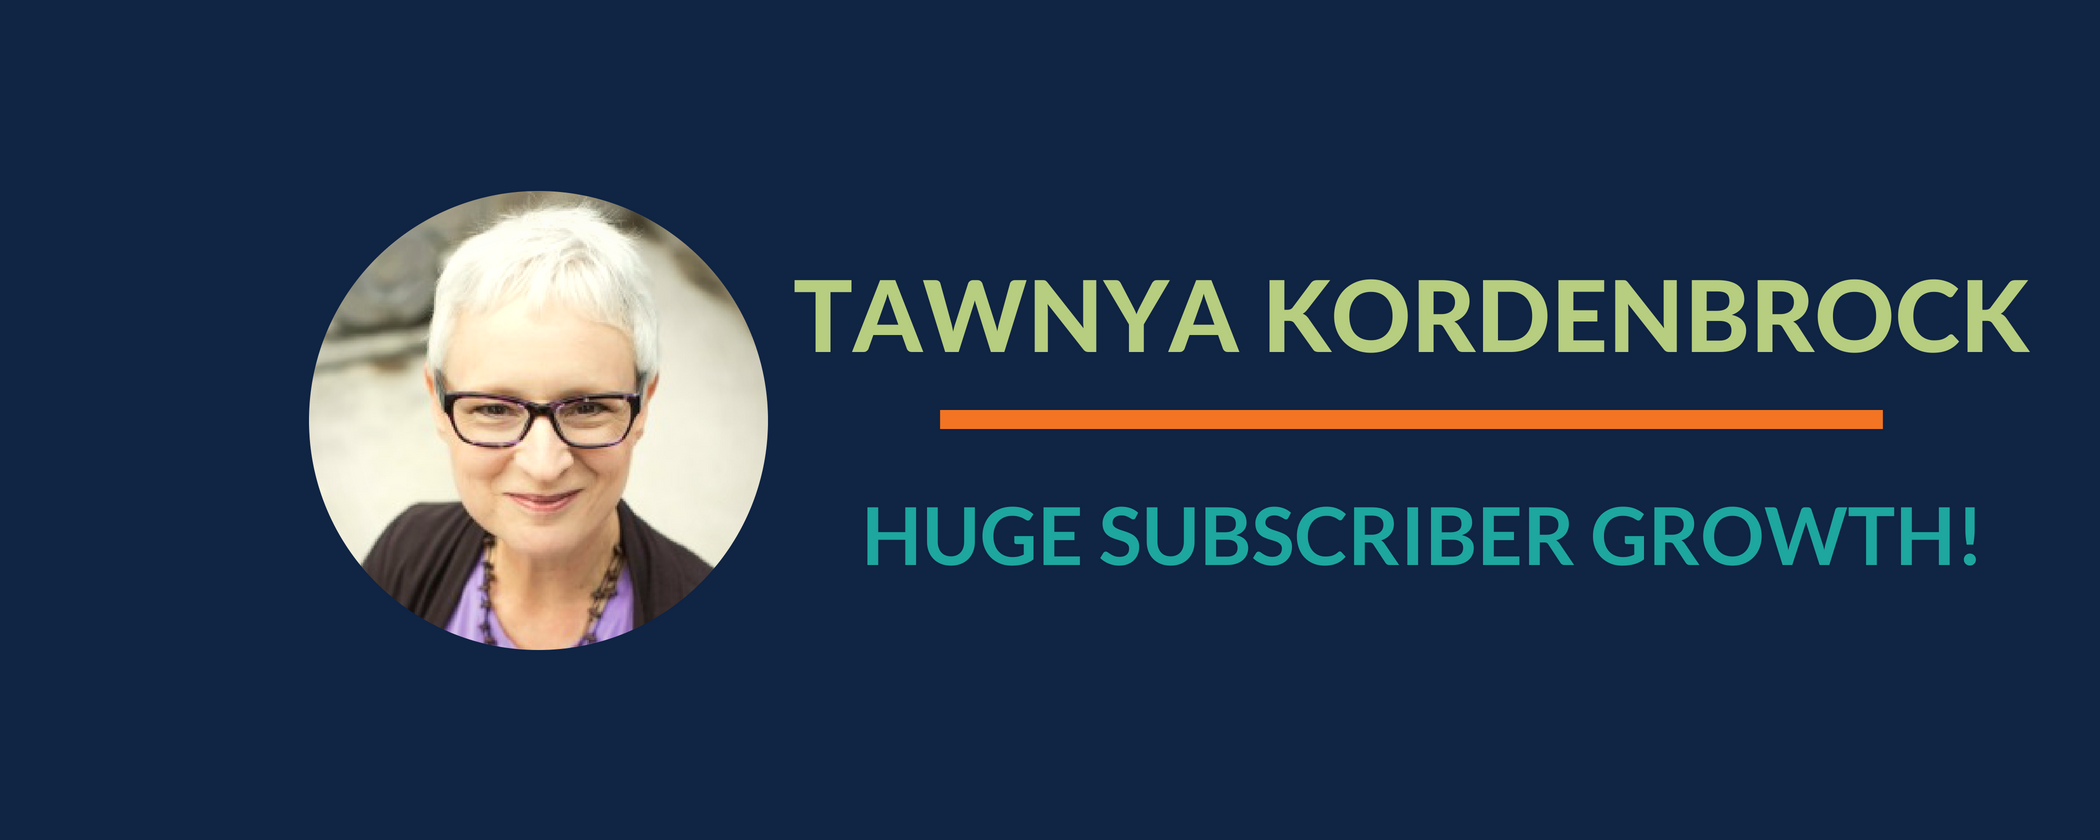 Success Story: Tawnya’s amazing subscriber growth in less than a year!